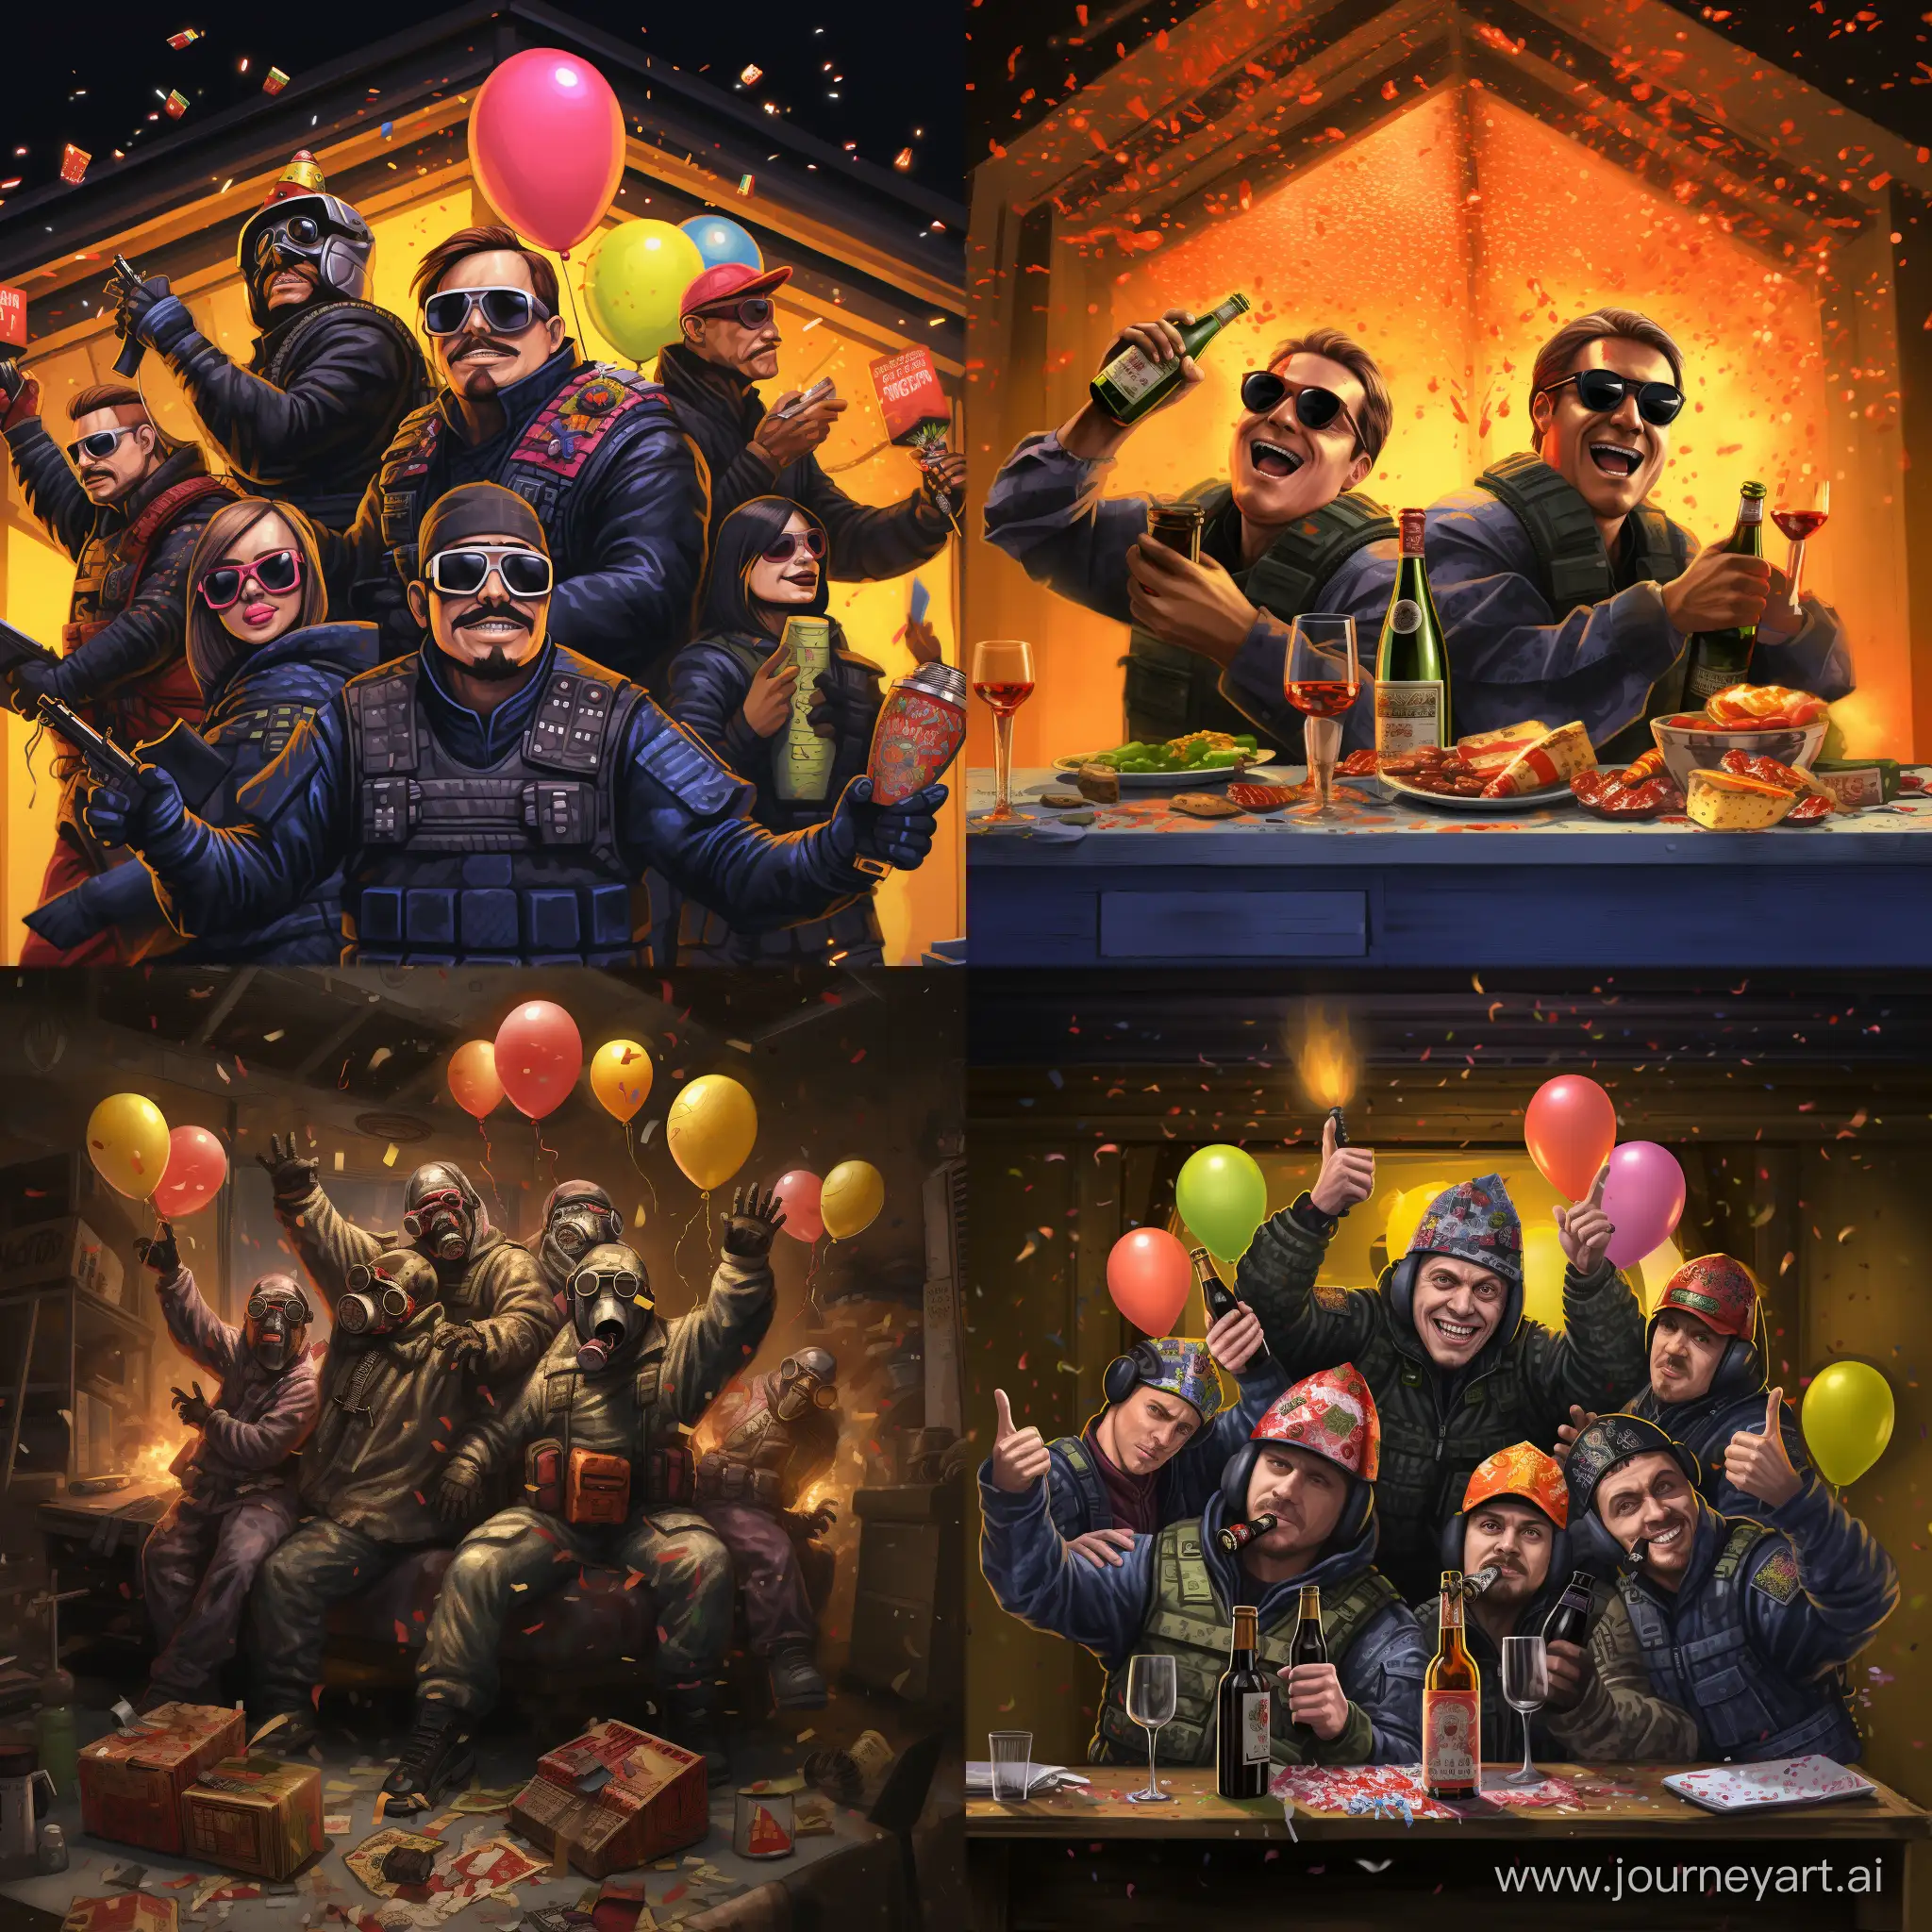 Counter Strike 2 players, celebrating The New year